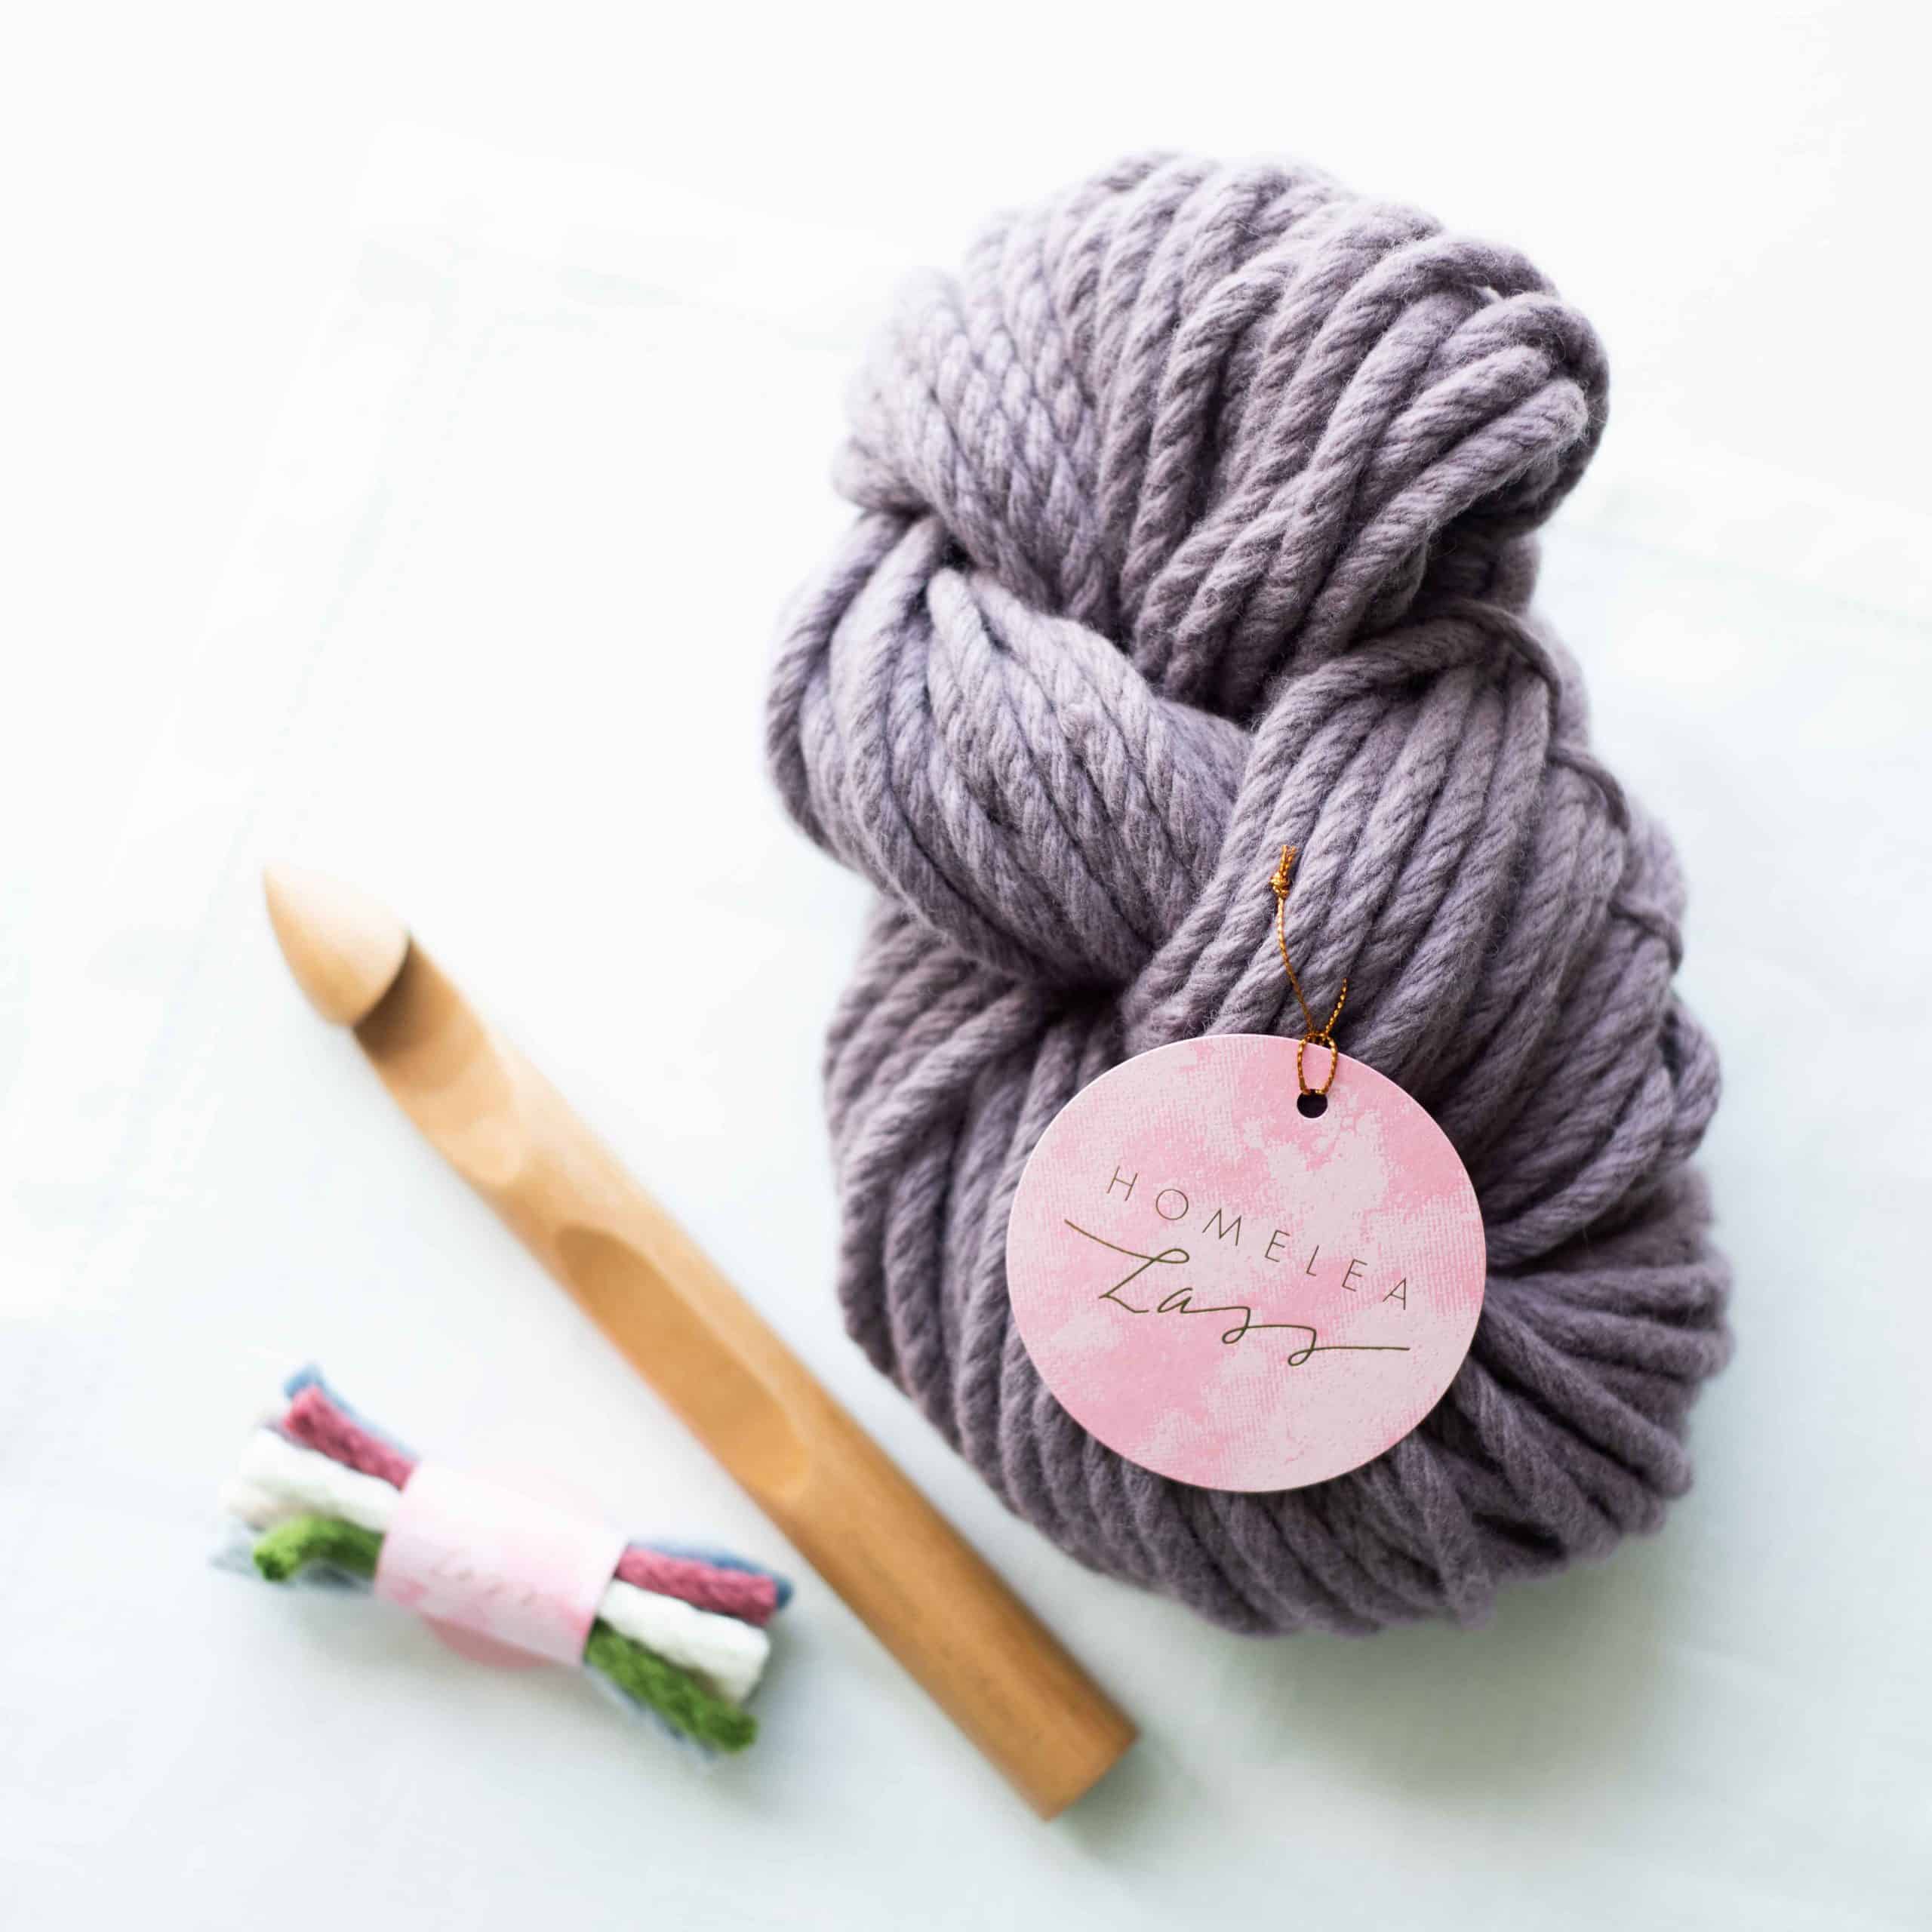  300g Easy Yarn for Crocheting, Chunky Thick Cotton